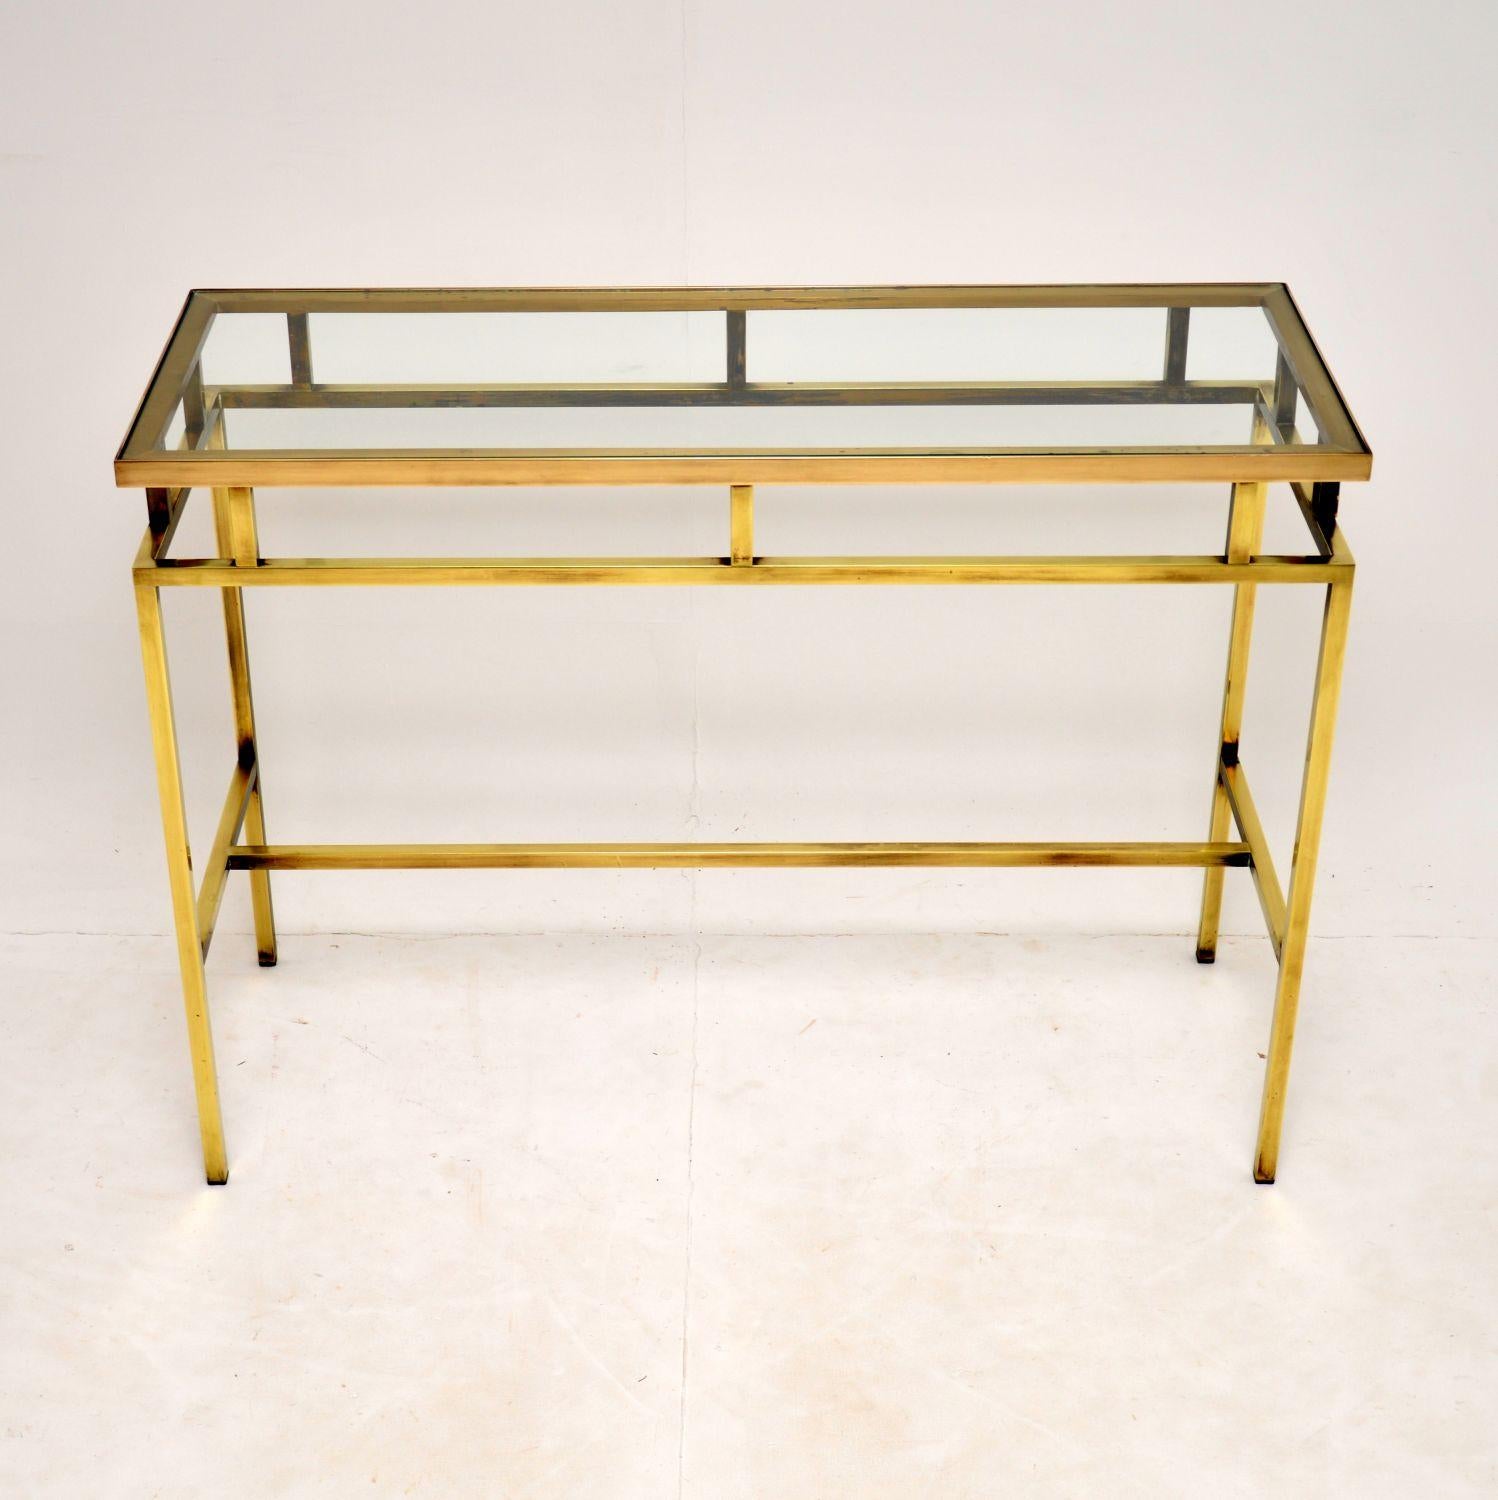 A top quality vintage solid brass console table, dating from the 1960’s. This was most likely made in Italy of France.

It is beautifully made, it is identical front and back so can be used as a free standing item.

The solid brass is in